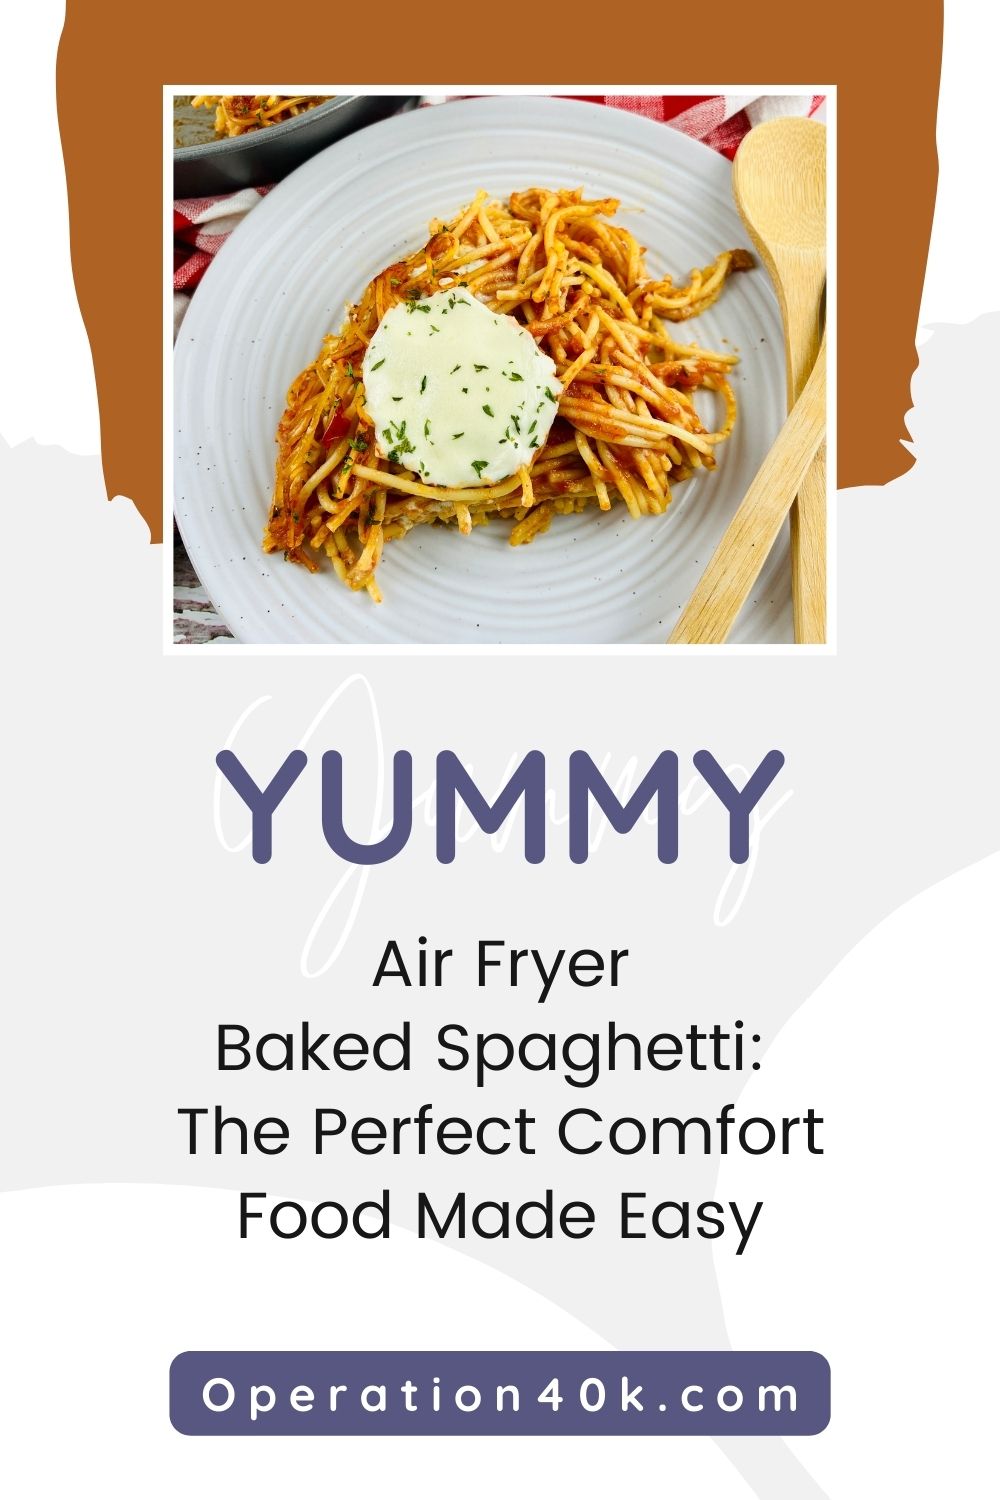 Air Fryer Baked Spaghetti: The Perfect Comfort Food Made Easy